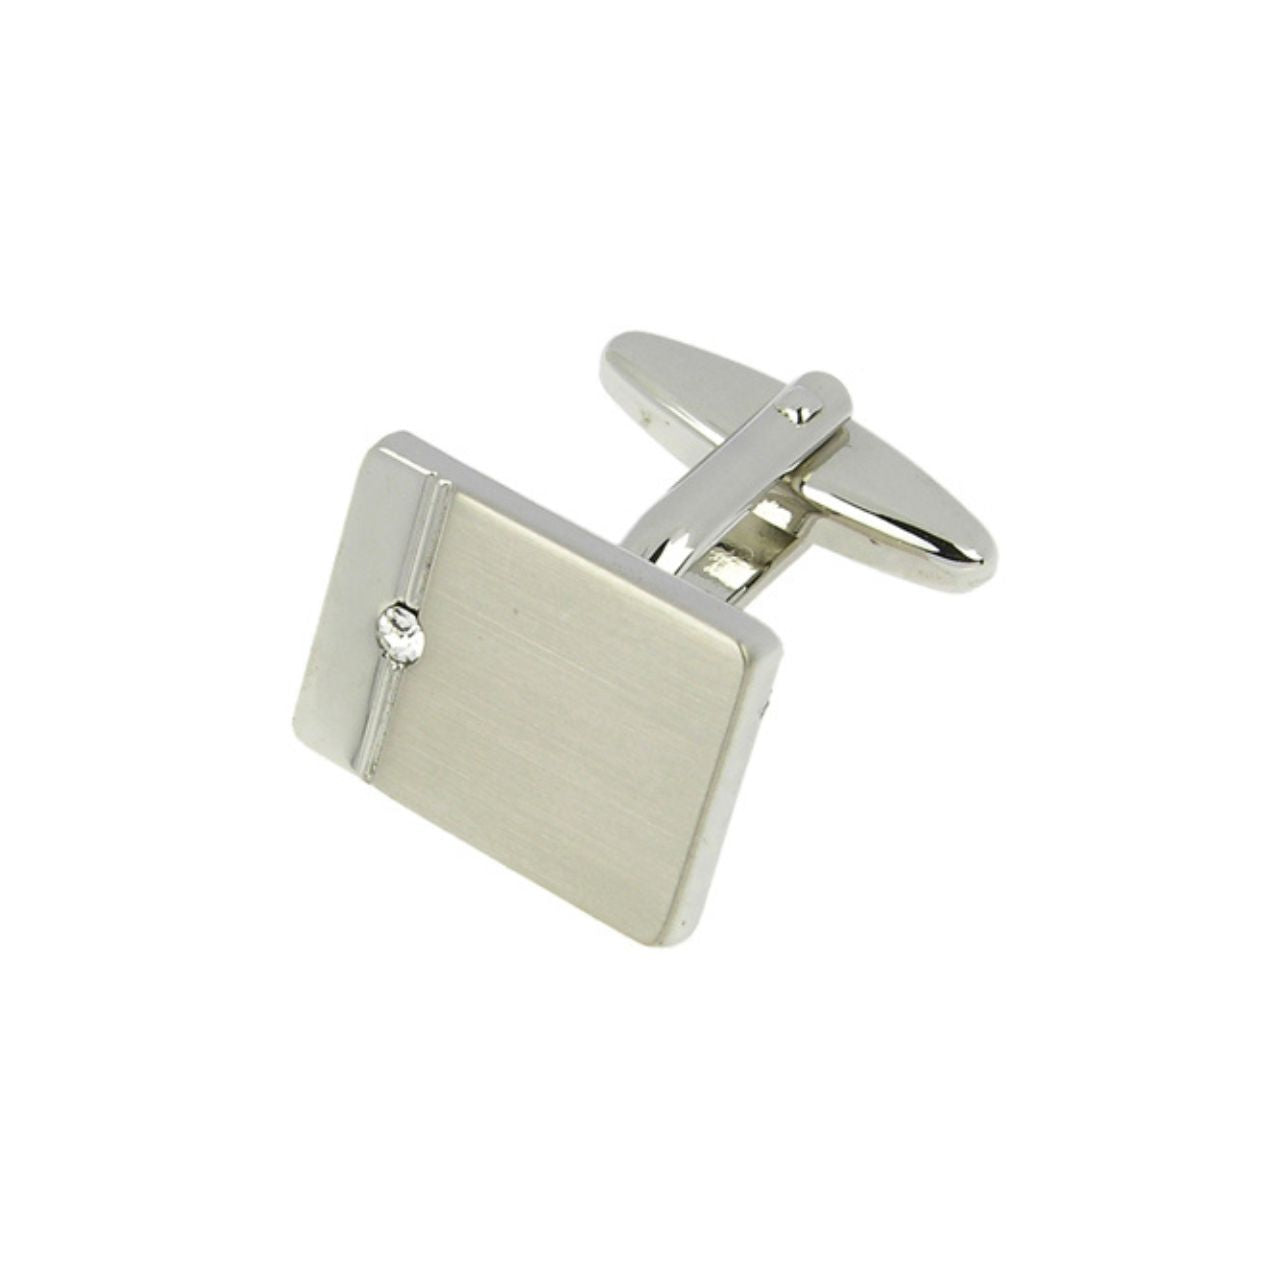 Silver Horizontal Line Single Crystal Cufflink by Tipperary  This pair of cufflinks comes in a gift box and makes a great gift for fathers, brothers, colleagues and friends for all occasions. Also a great gift for grooms and groomsmen.